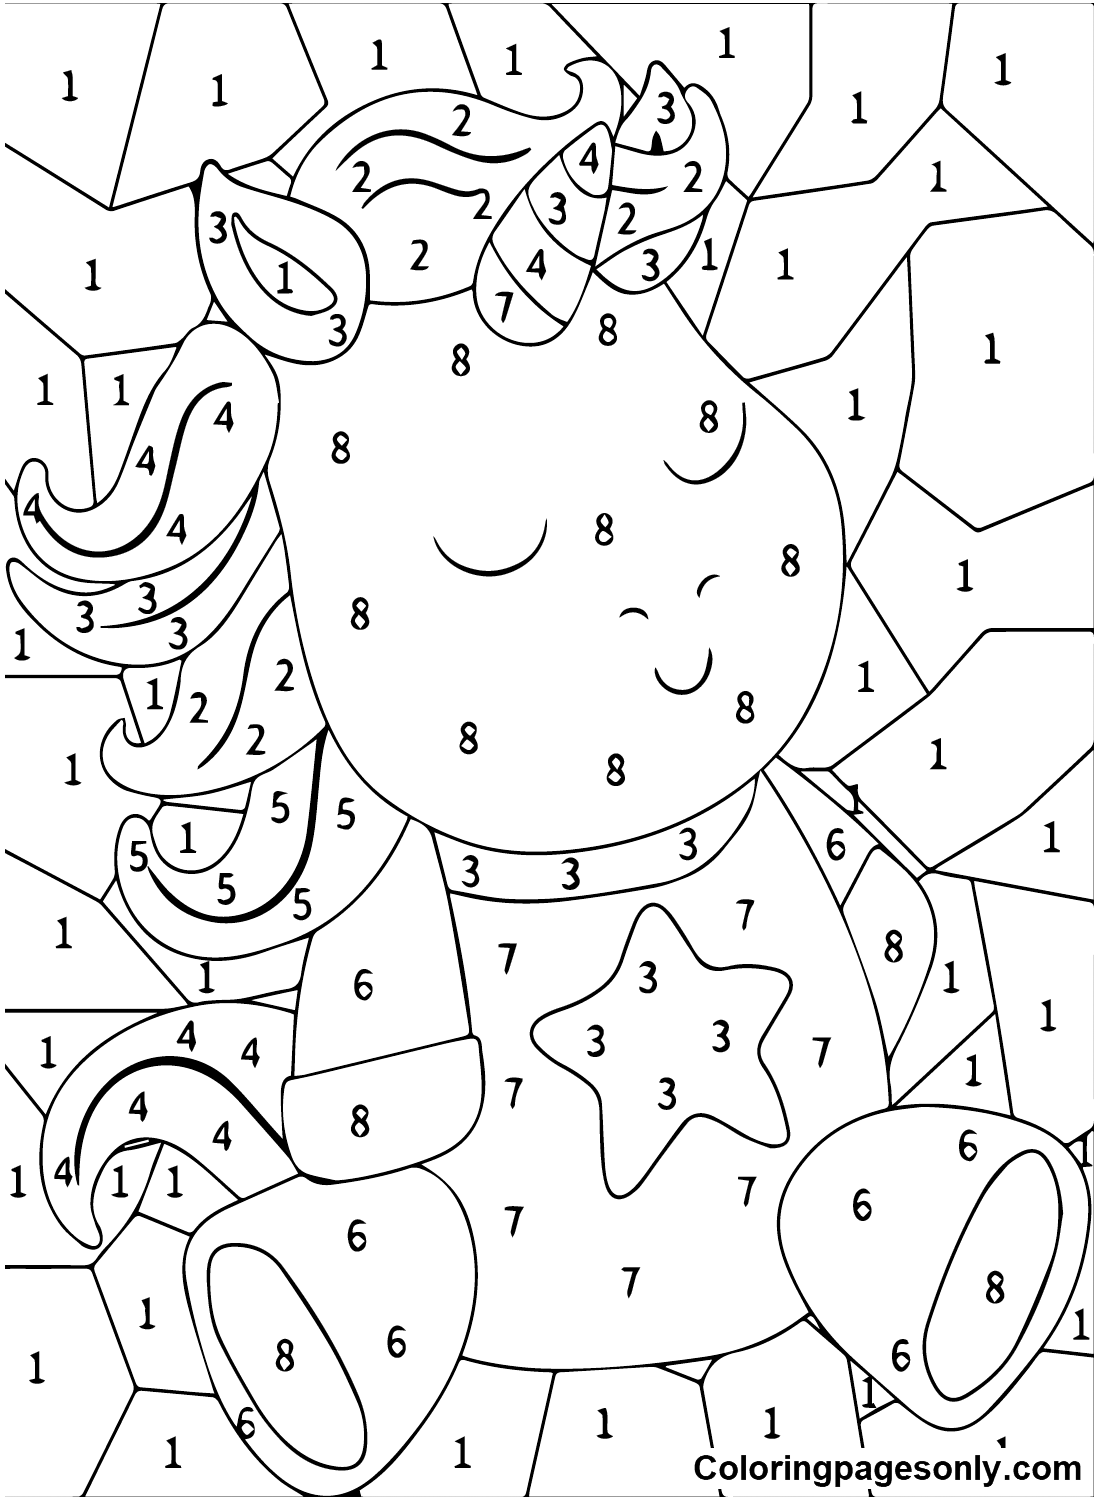 Free Unicorn Color By Number Coloring Pages